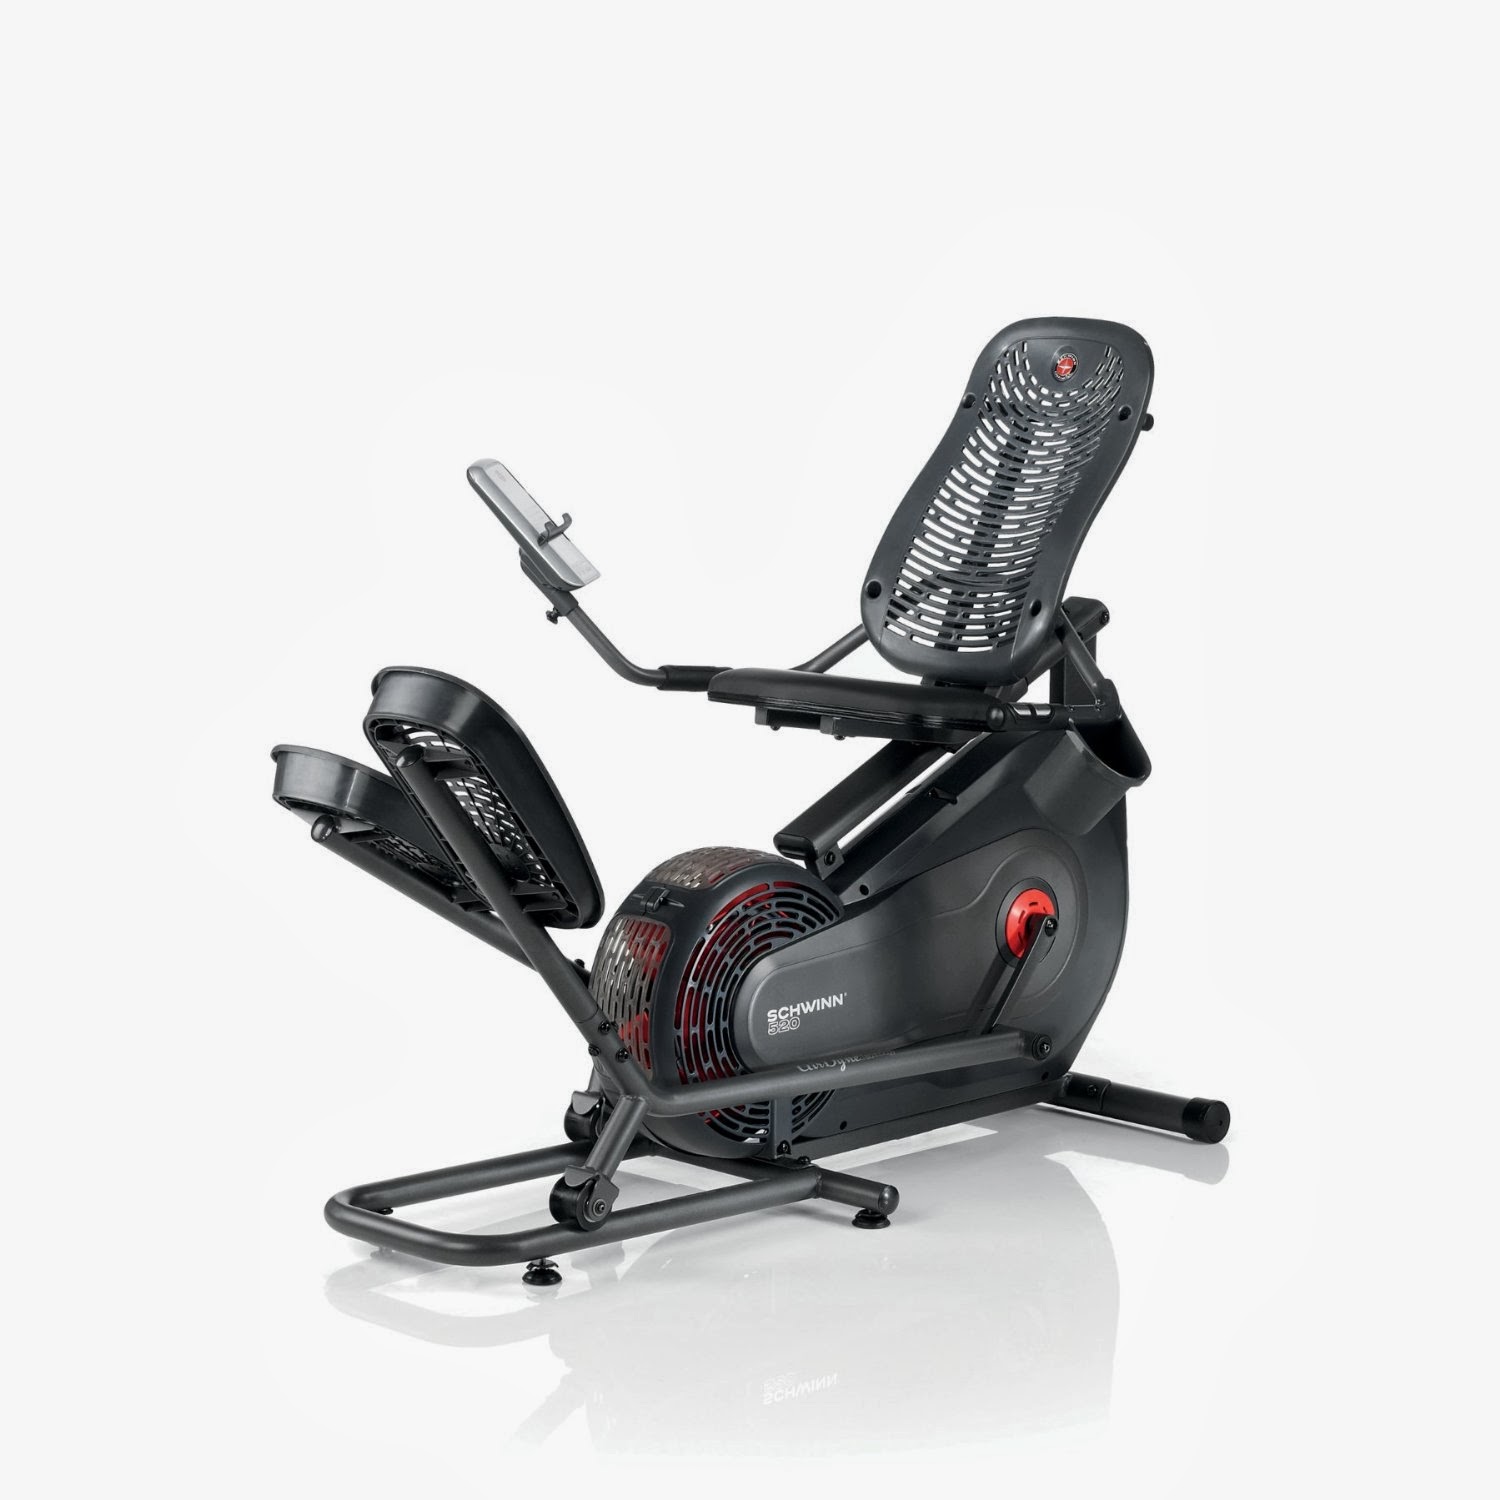 Schwinn 520 Recumbent Elliptical Trainer, picture, review features & specifications